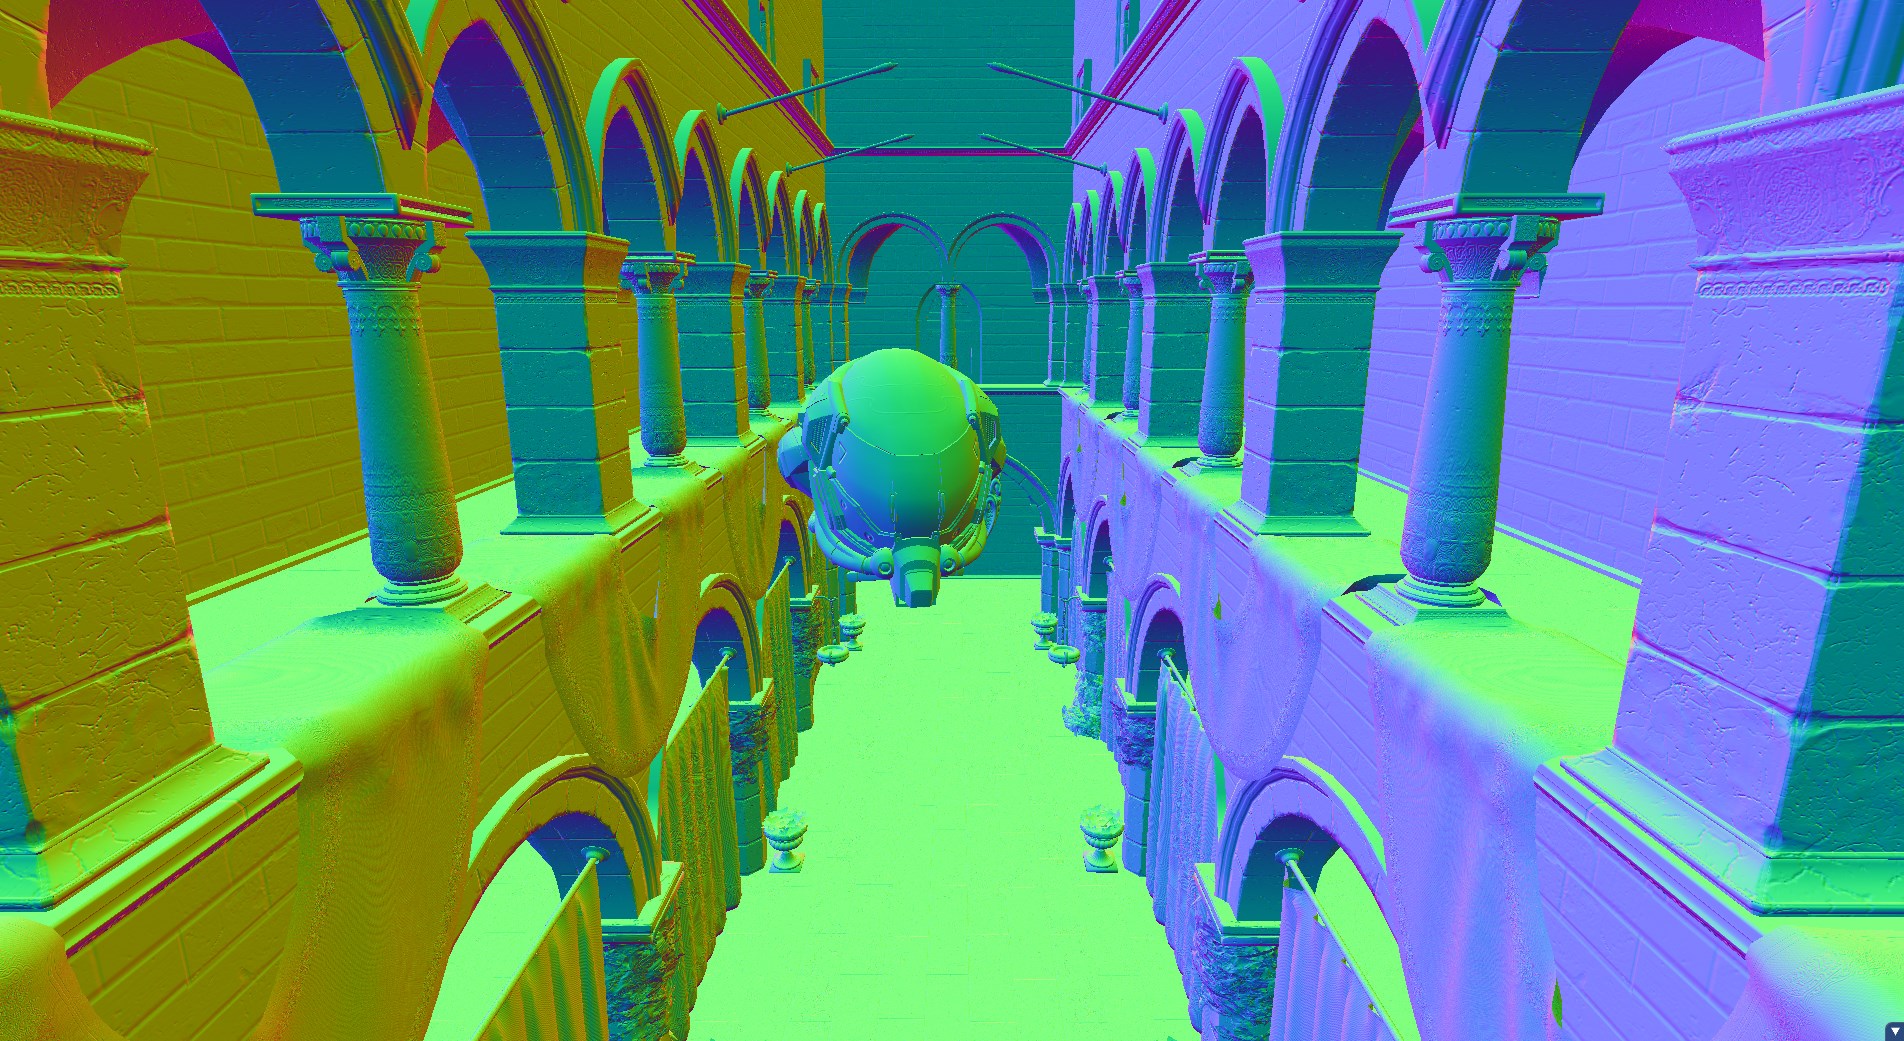 With normal map visualization